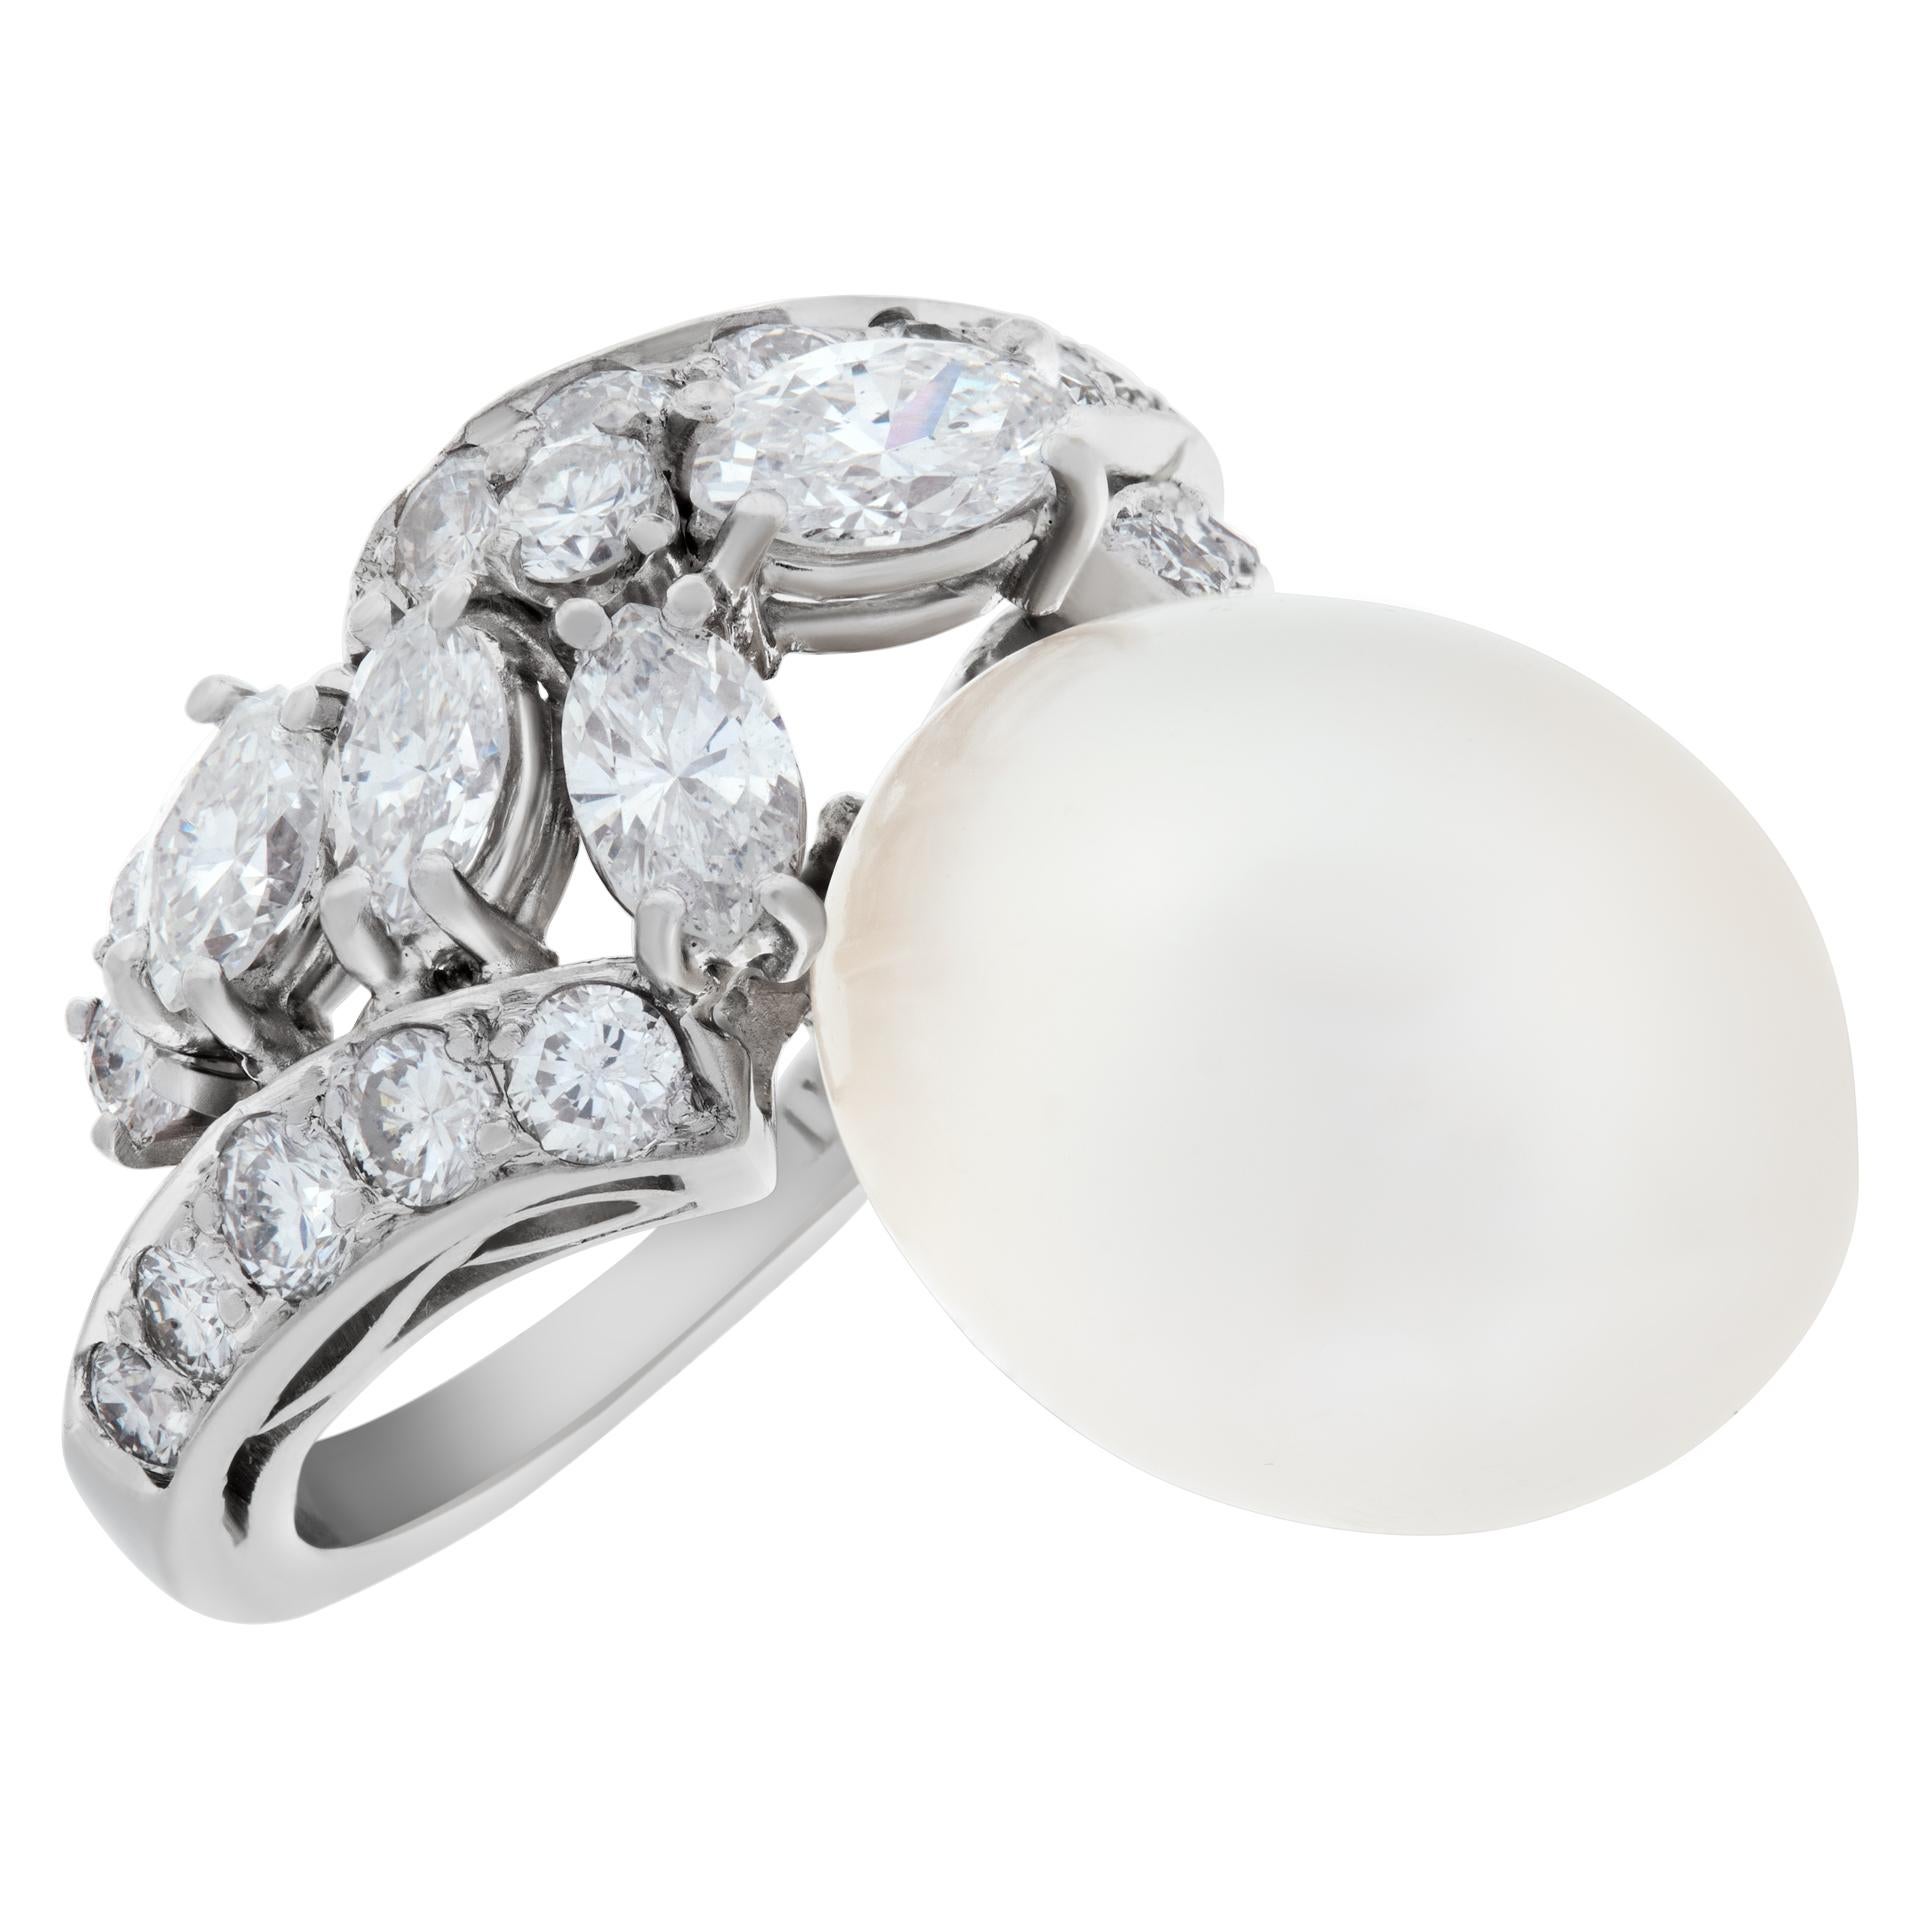 Pearl & Diamond Ring Set in Platinum In Excellent Condition For Sale In Surfside, FL